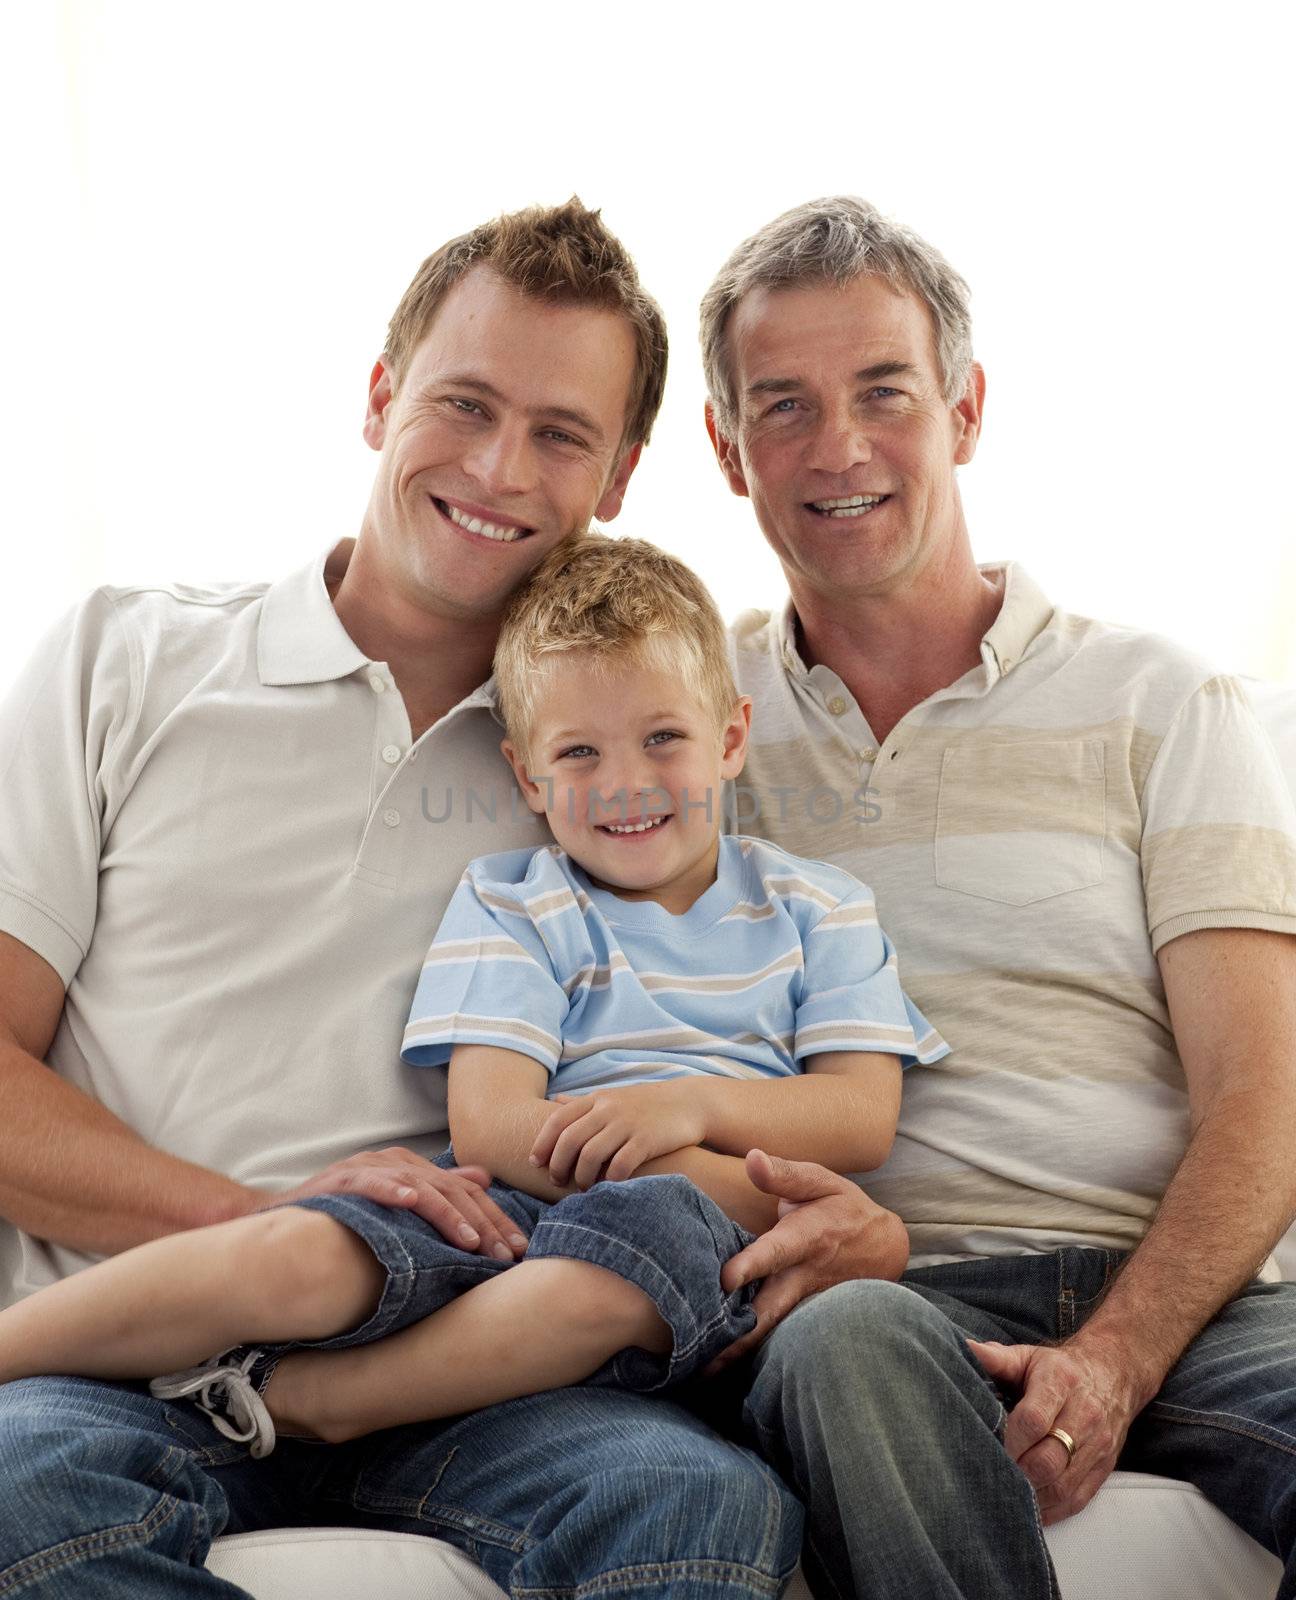 Smiling son, father and grandfather sitting on sofa by Wavebreakmedia